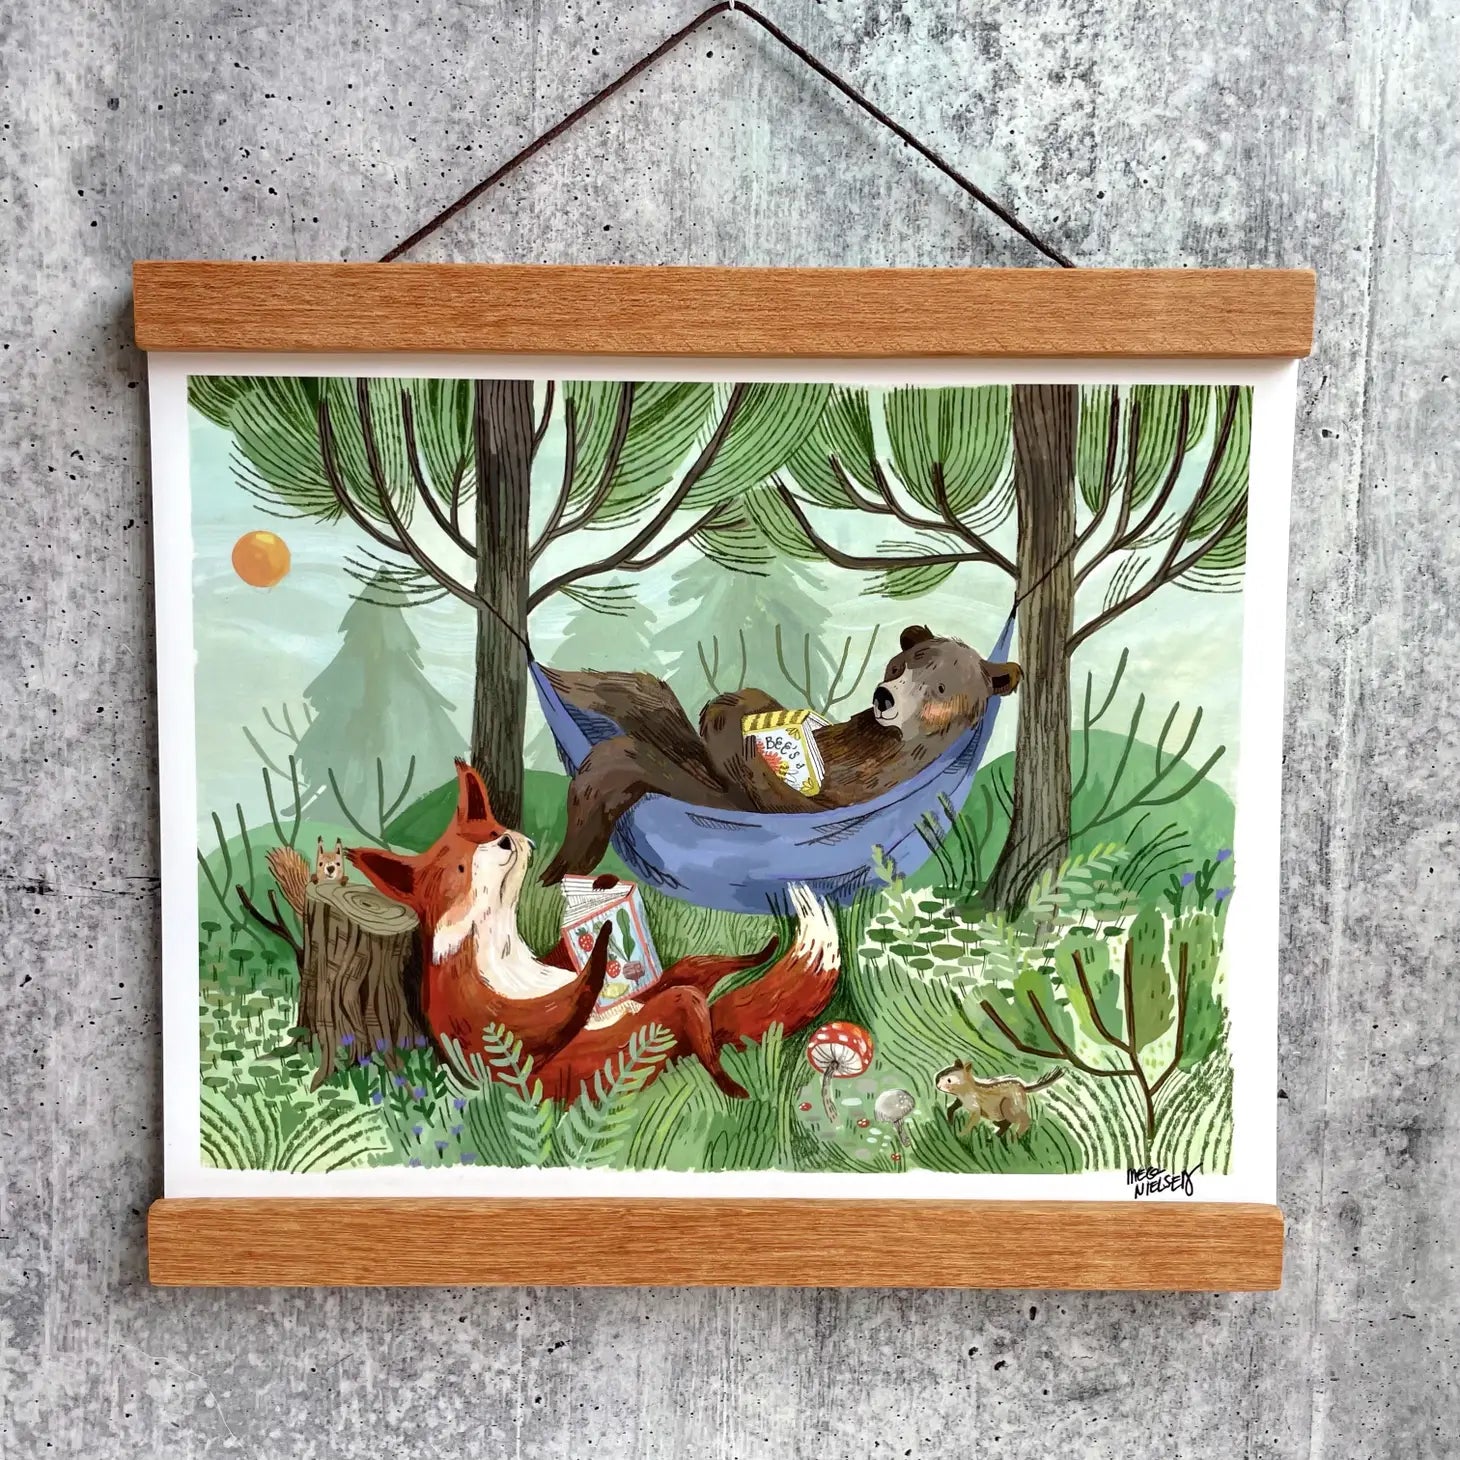 Lazy Days - 8x10 Art Print - Created by Little Pine Artistry Canyon & Cove